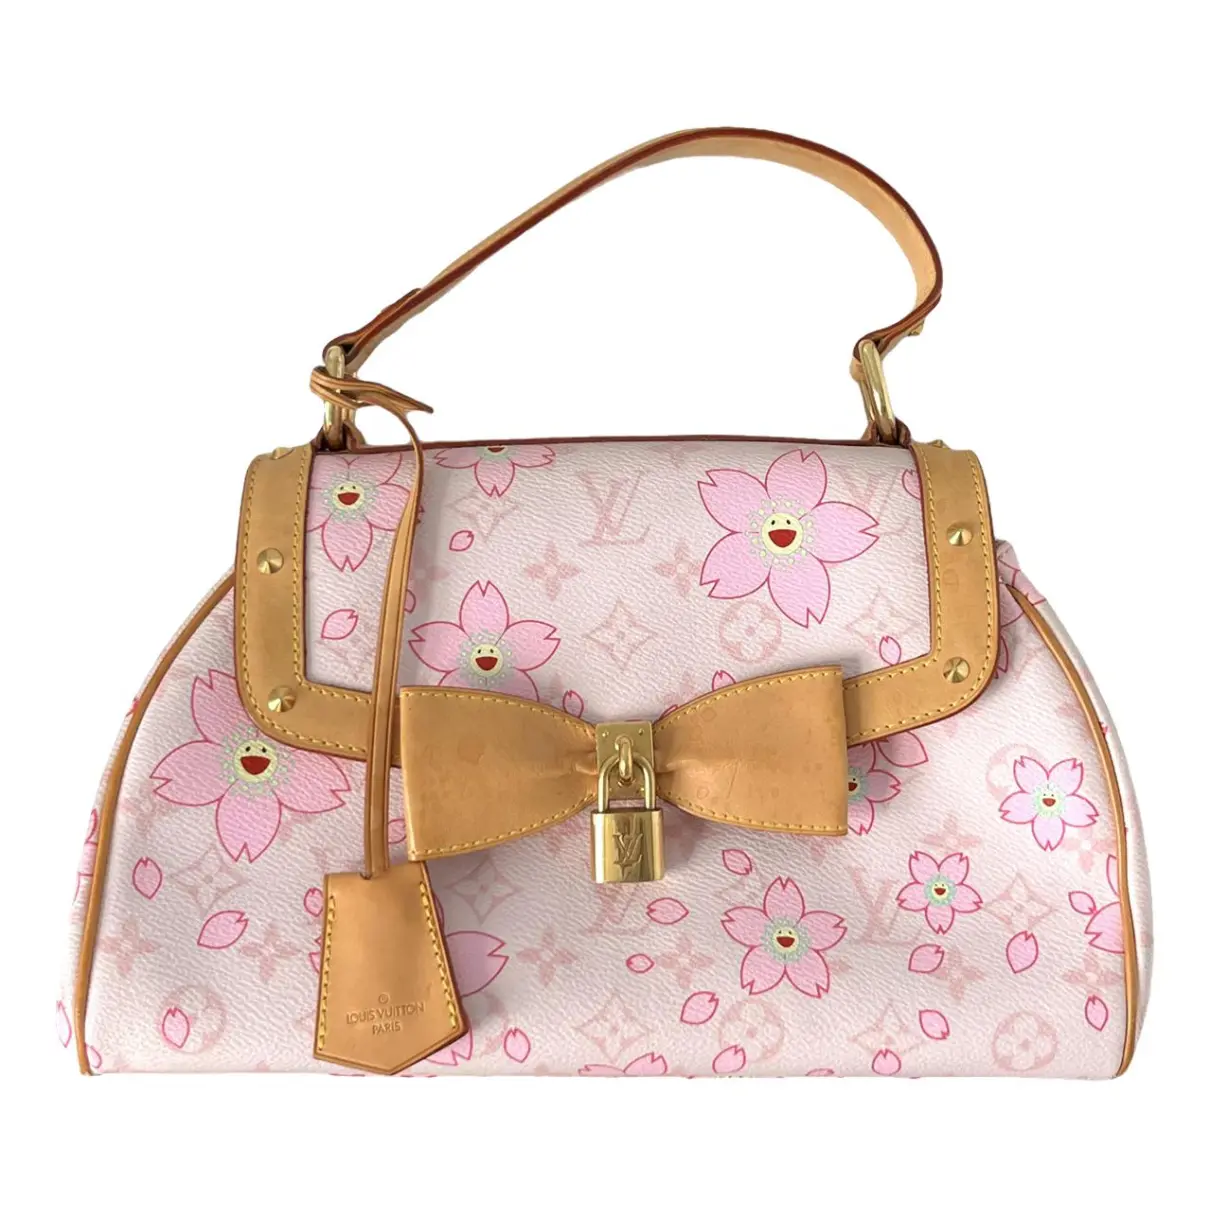 Louis Vuitton Pink And Yellow Purse - 6 For Sale on 1stDibs  lv pink and  yellow bag, louis vuitton pink and yellow bag, pink and yellow lv bag